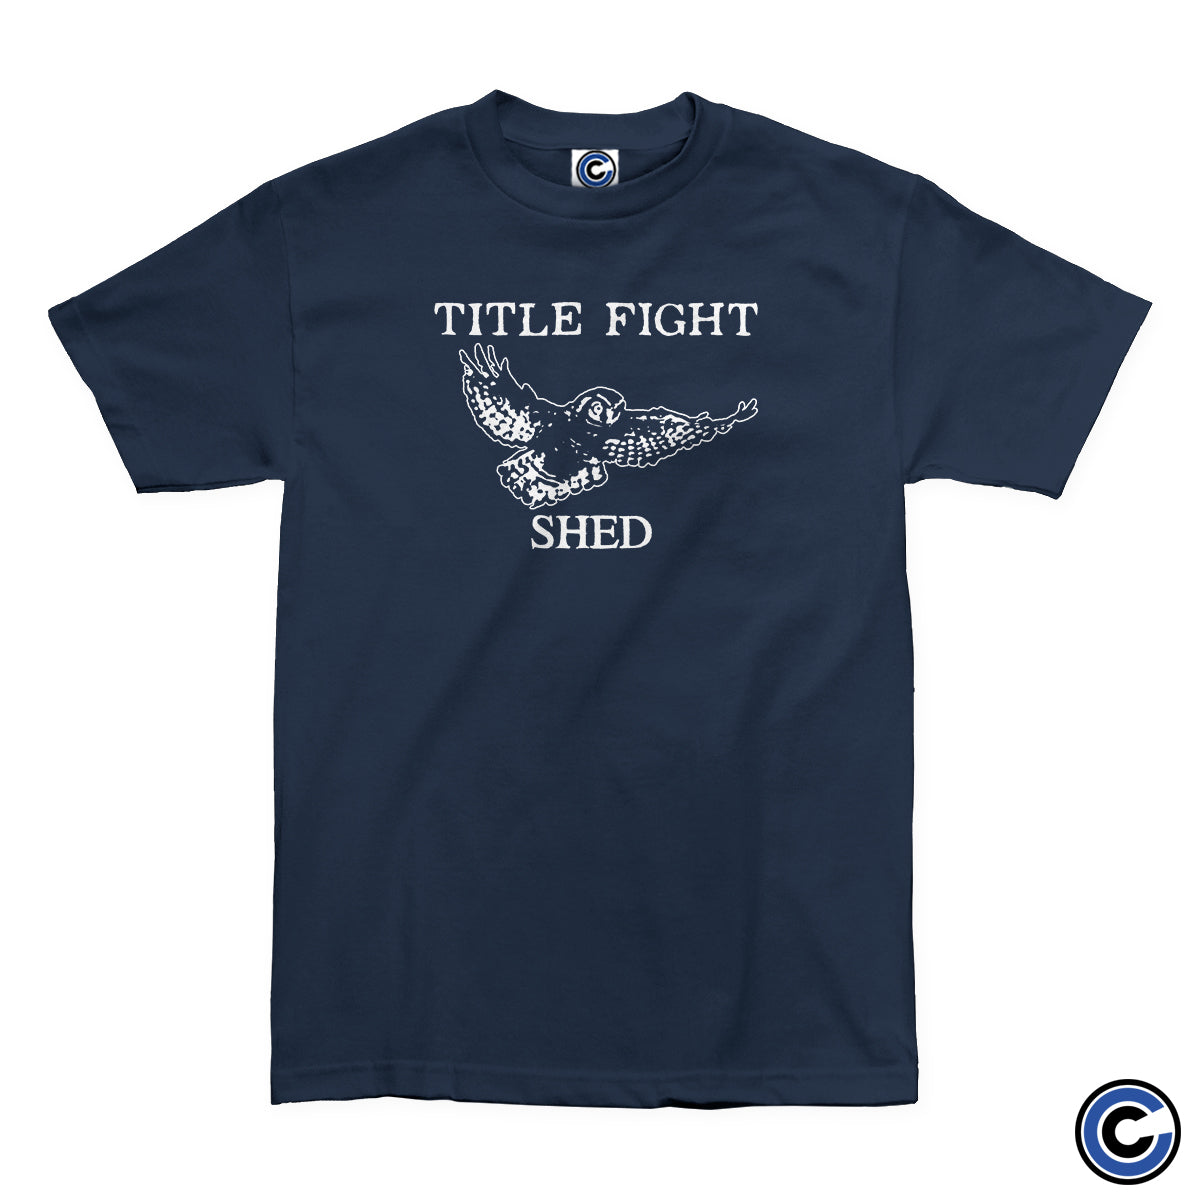 Title Fight "Shed Owl" Shirt